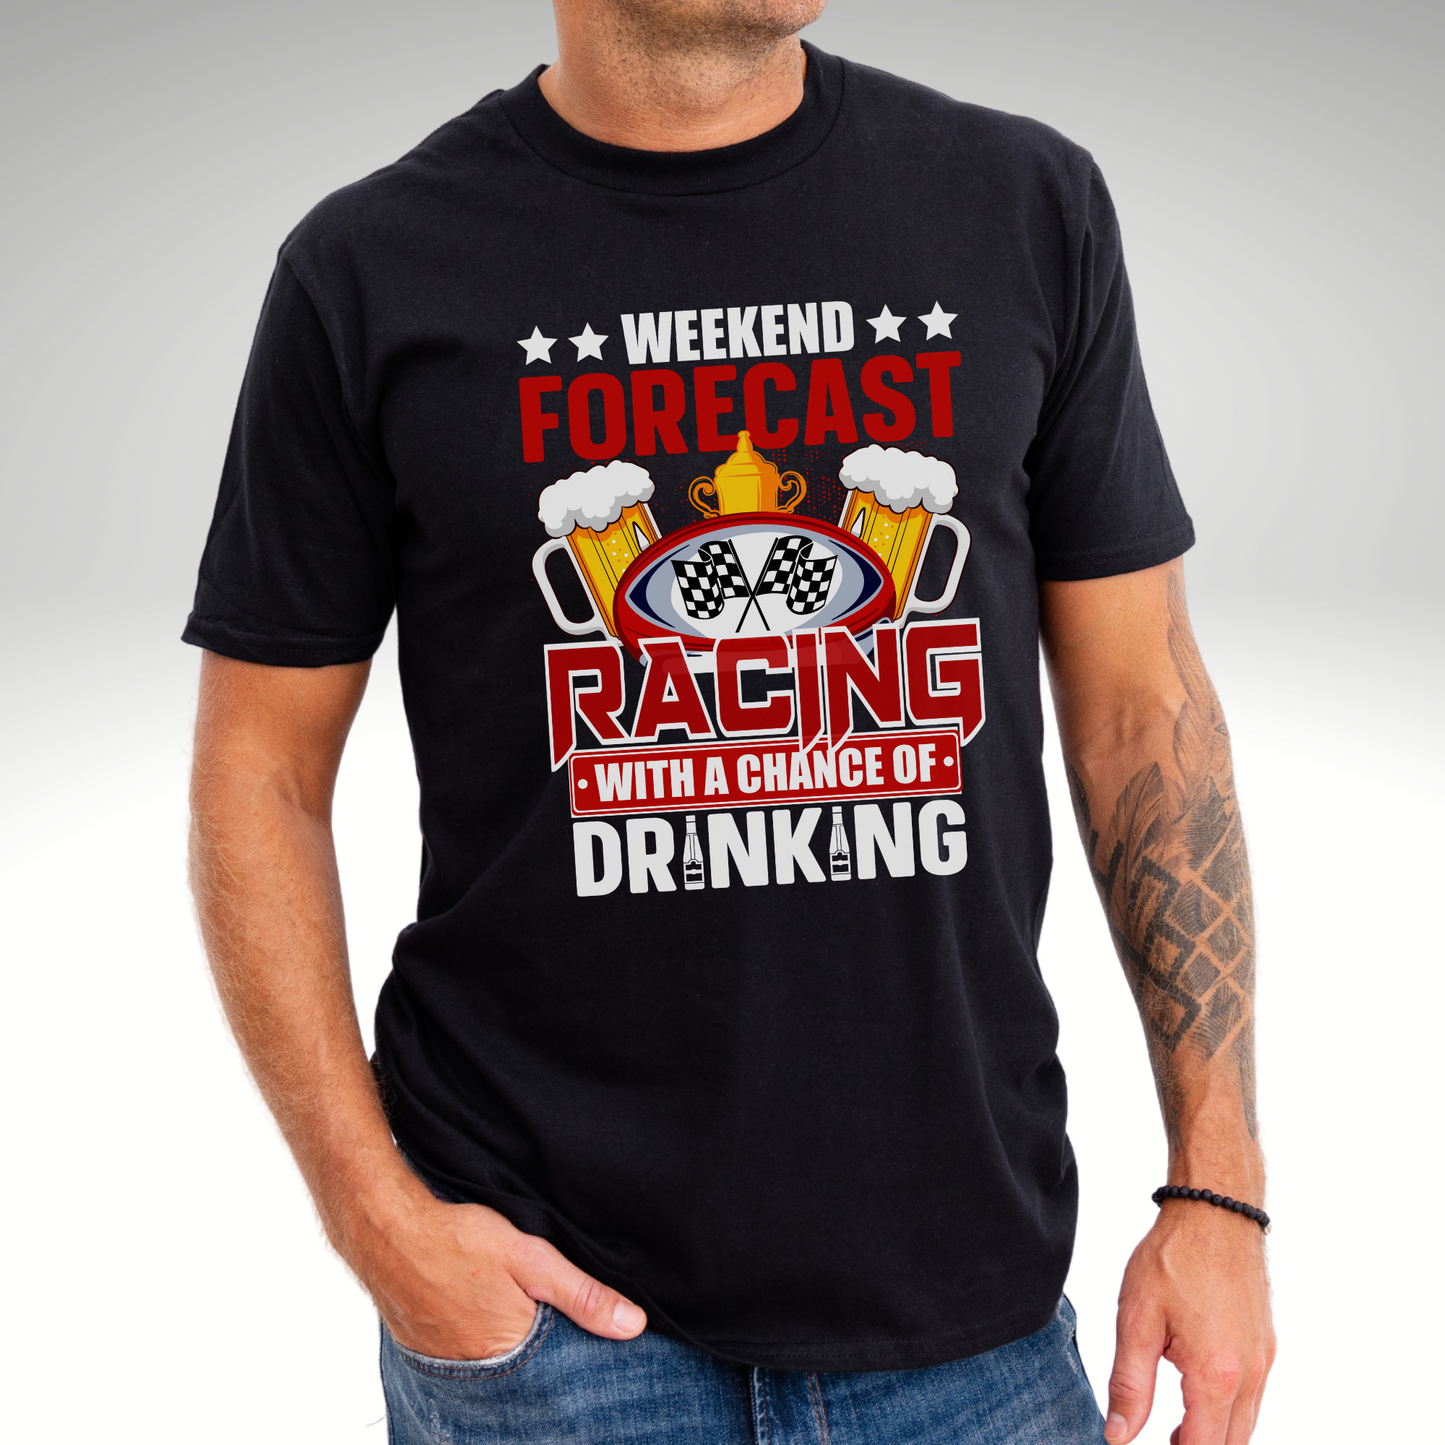 Weekend Forecast Racing With A Chance Of Drinking T-Shirts. Men's Funny Racing Shirts. 